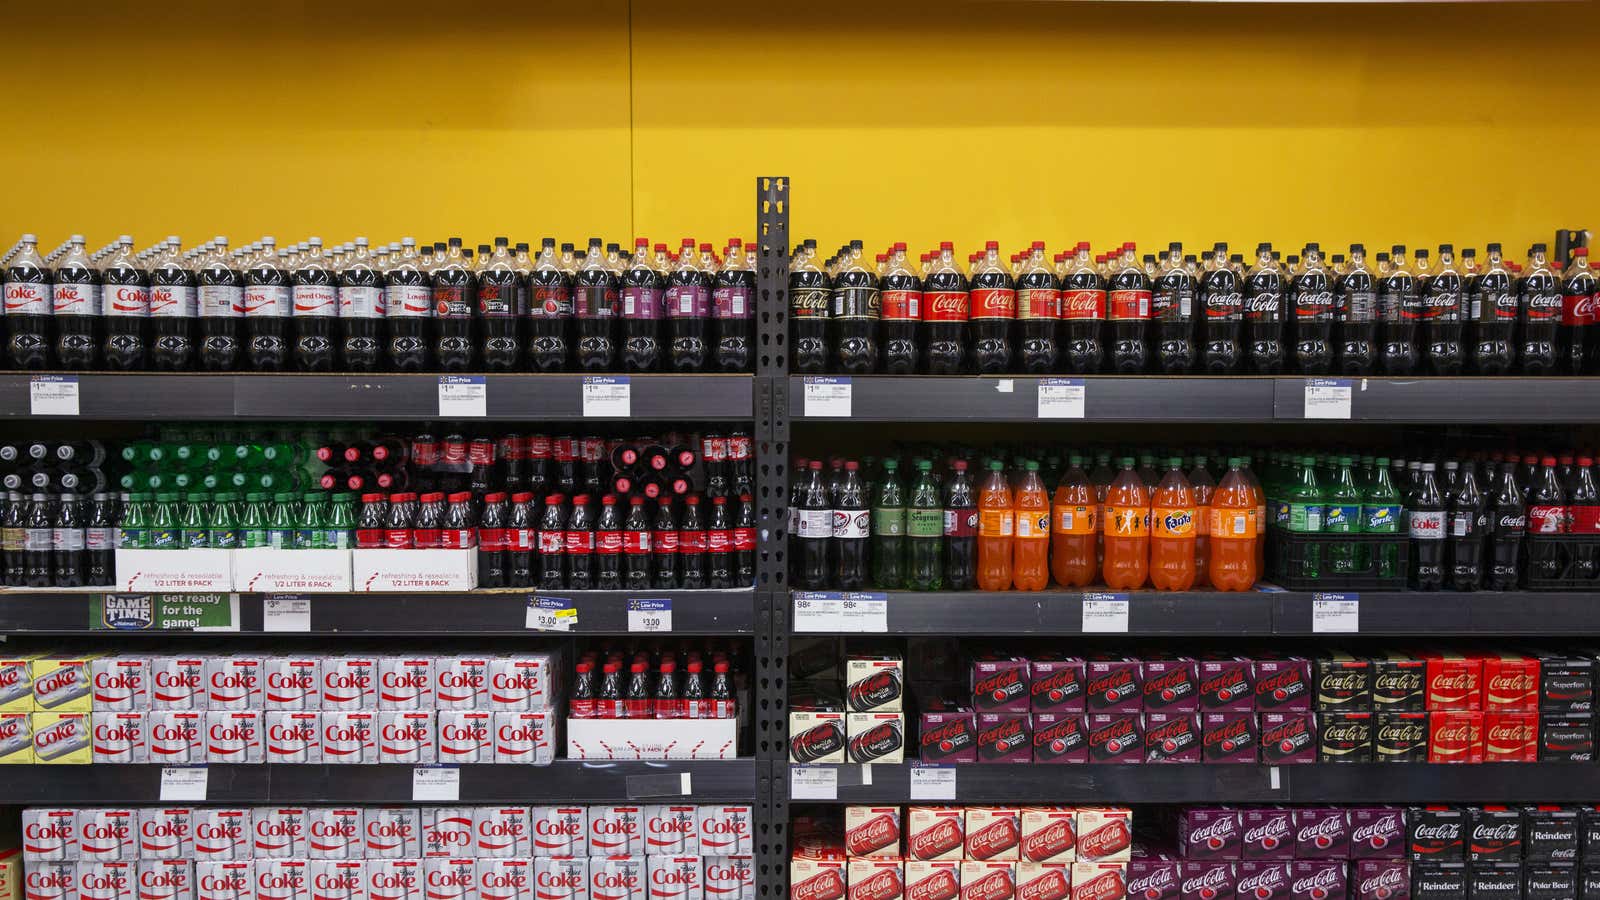 It’s been a brutal battle over sugary drinks.